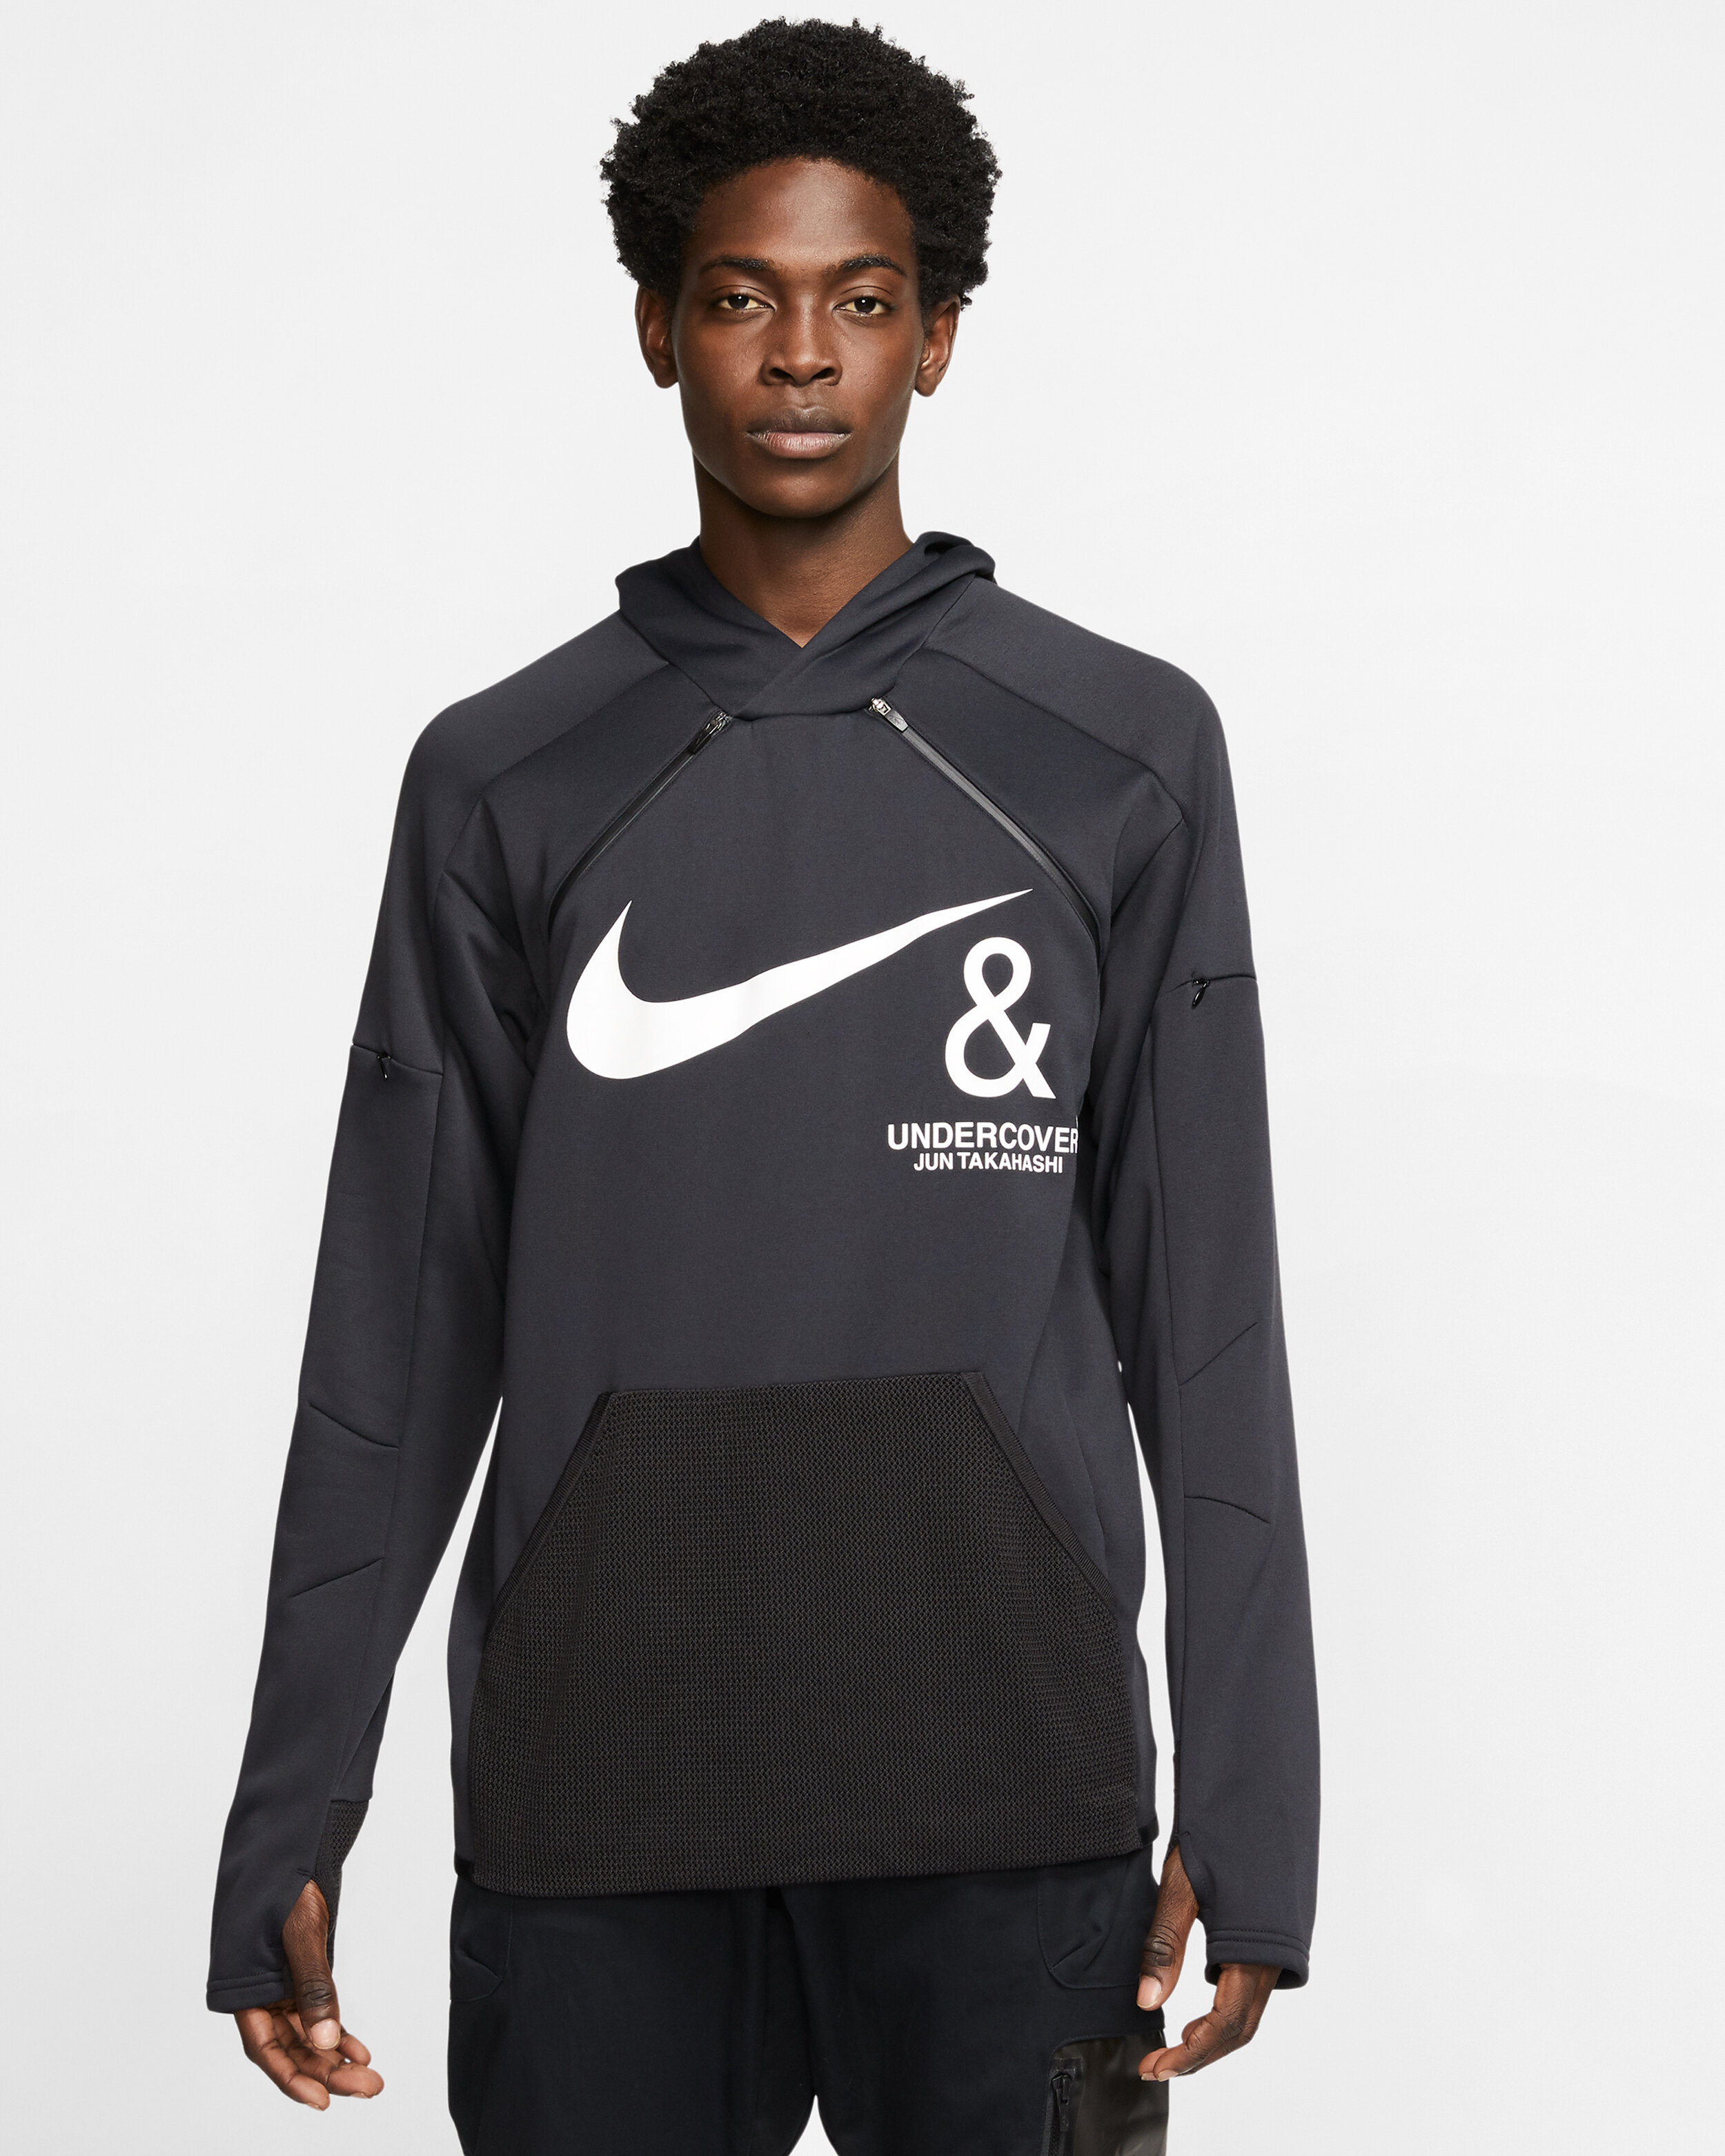 nike-x-undercover-winter-collection-39_92066.jpg